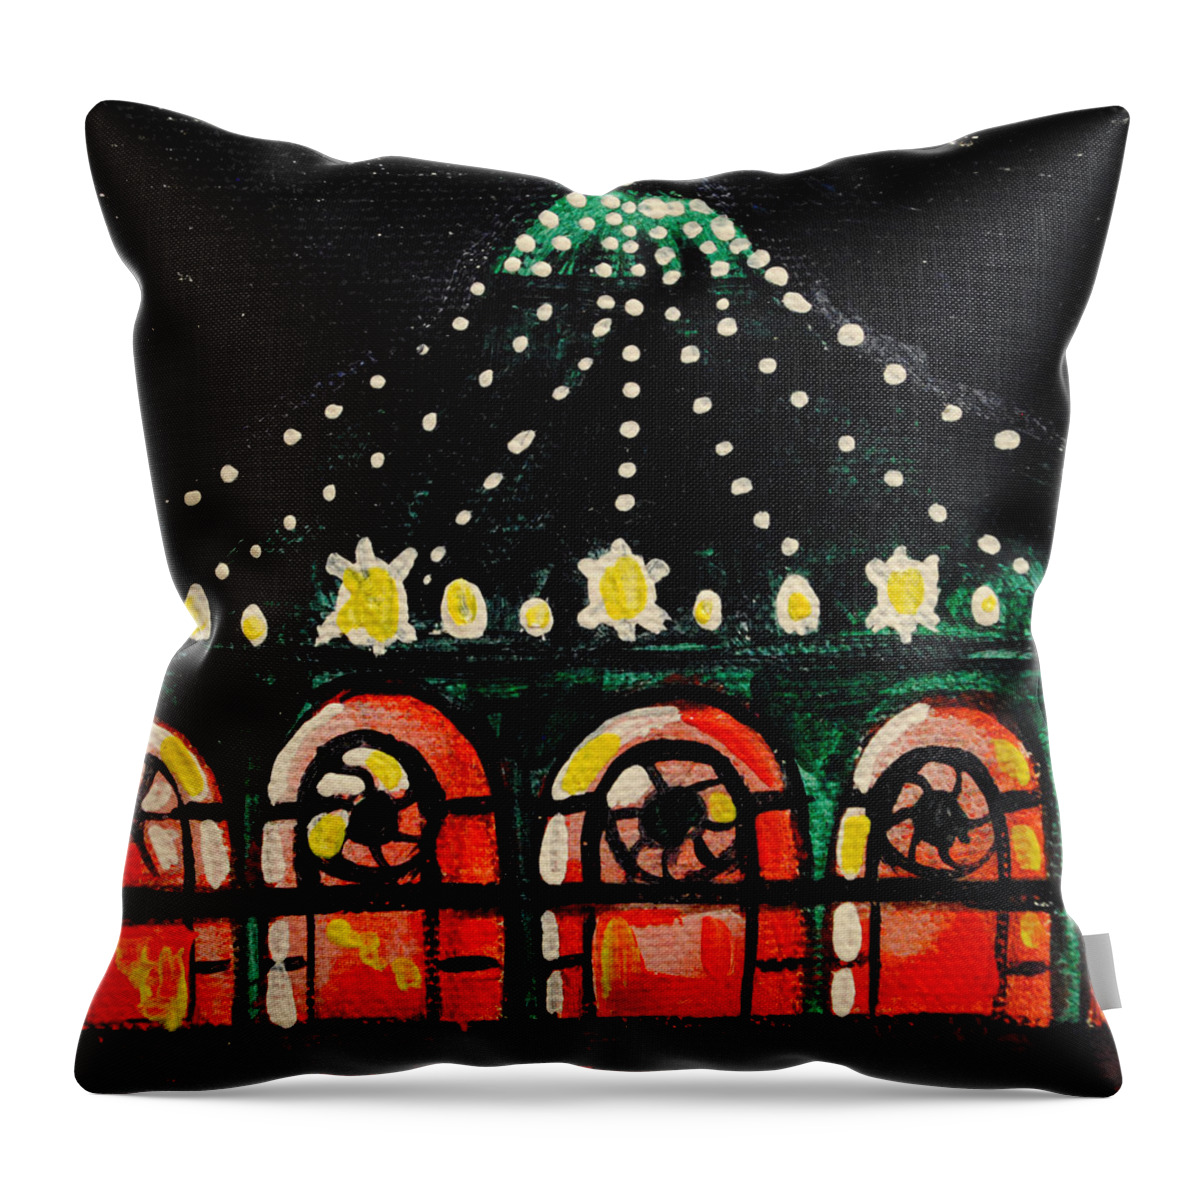 Asbury Park Throw Pillow featuring the painting Mini Memory by Patricia Arroyo